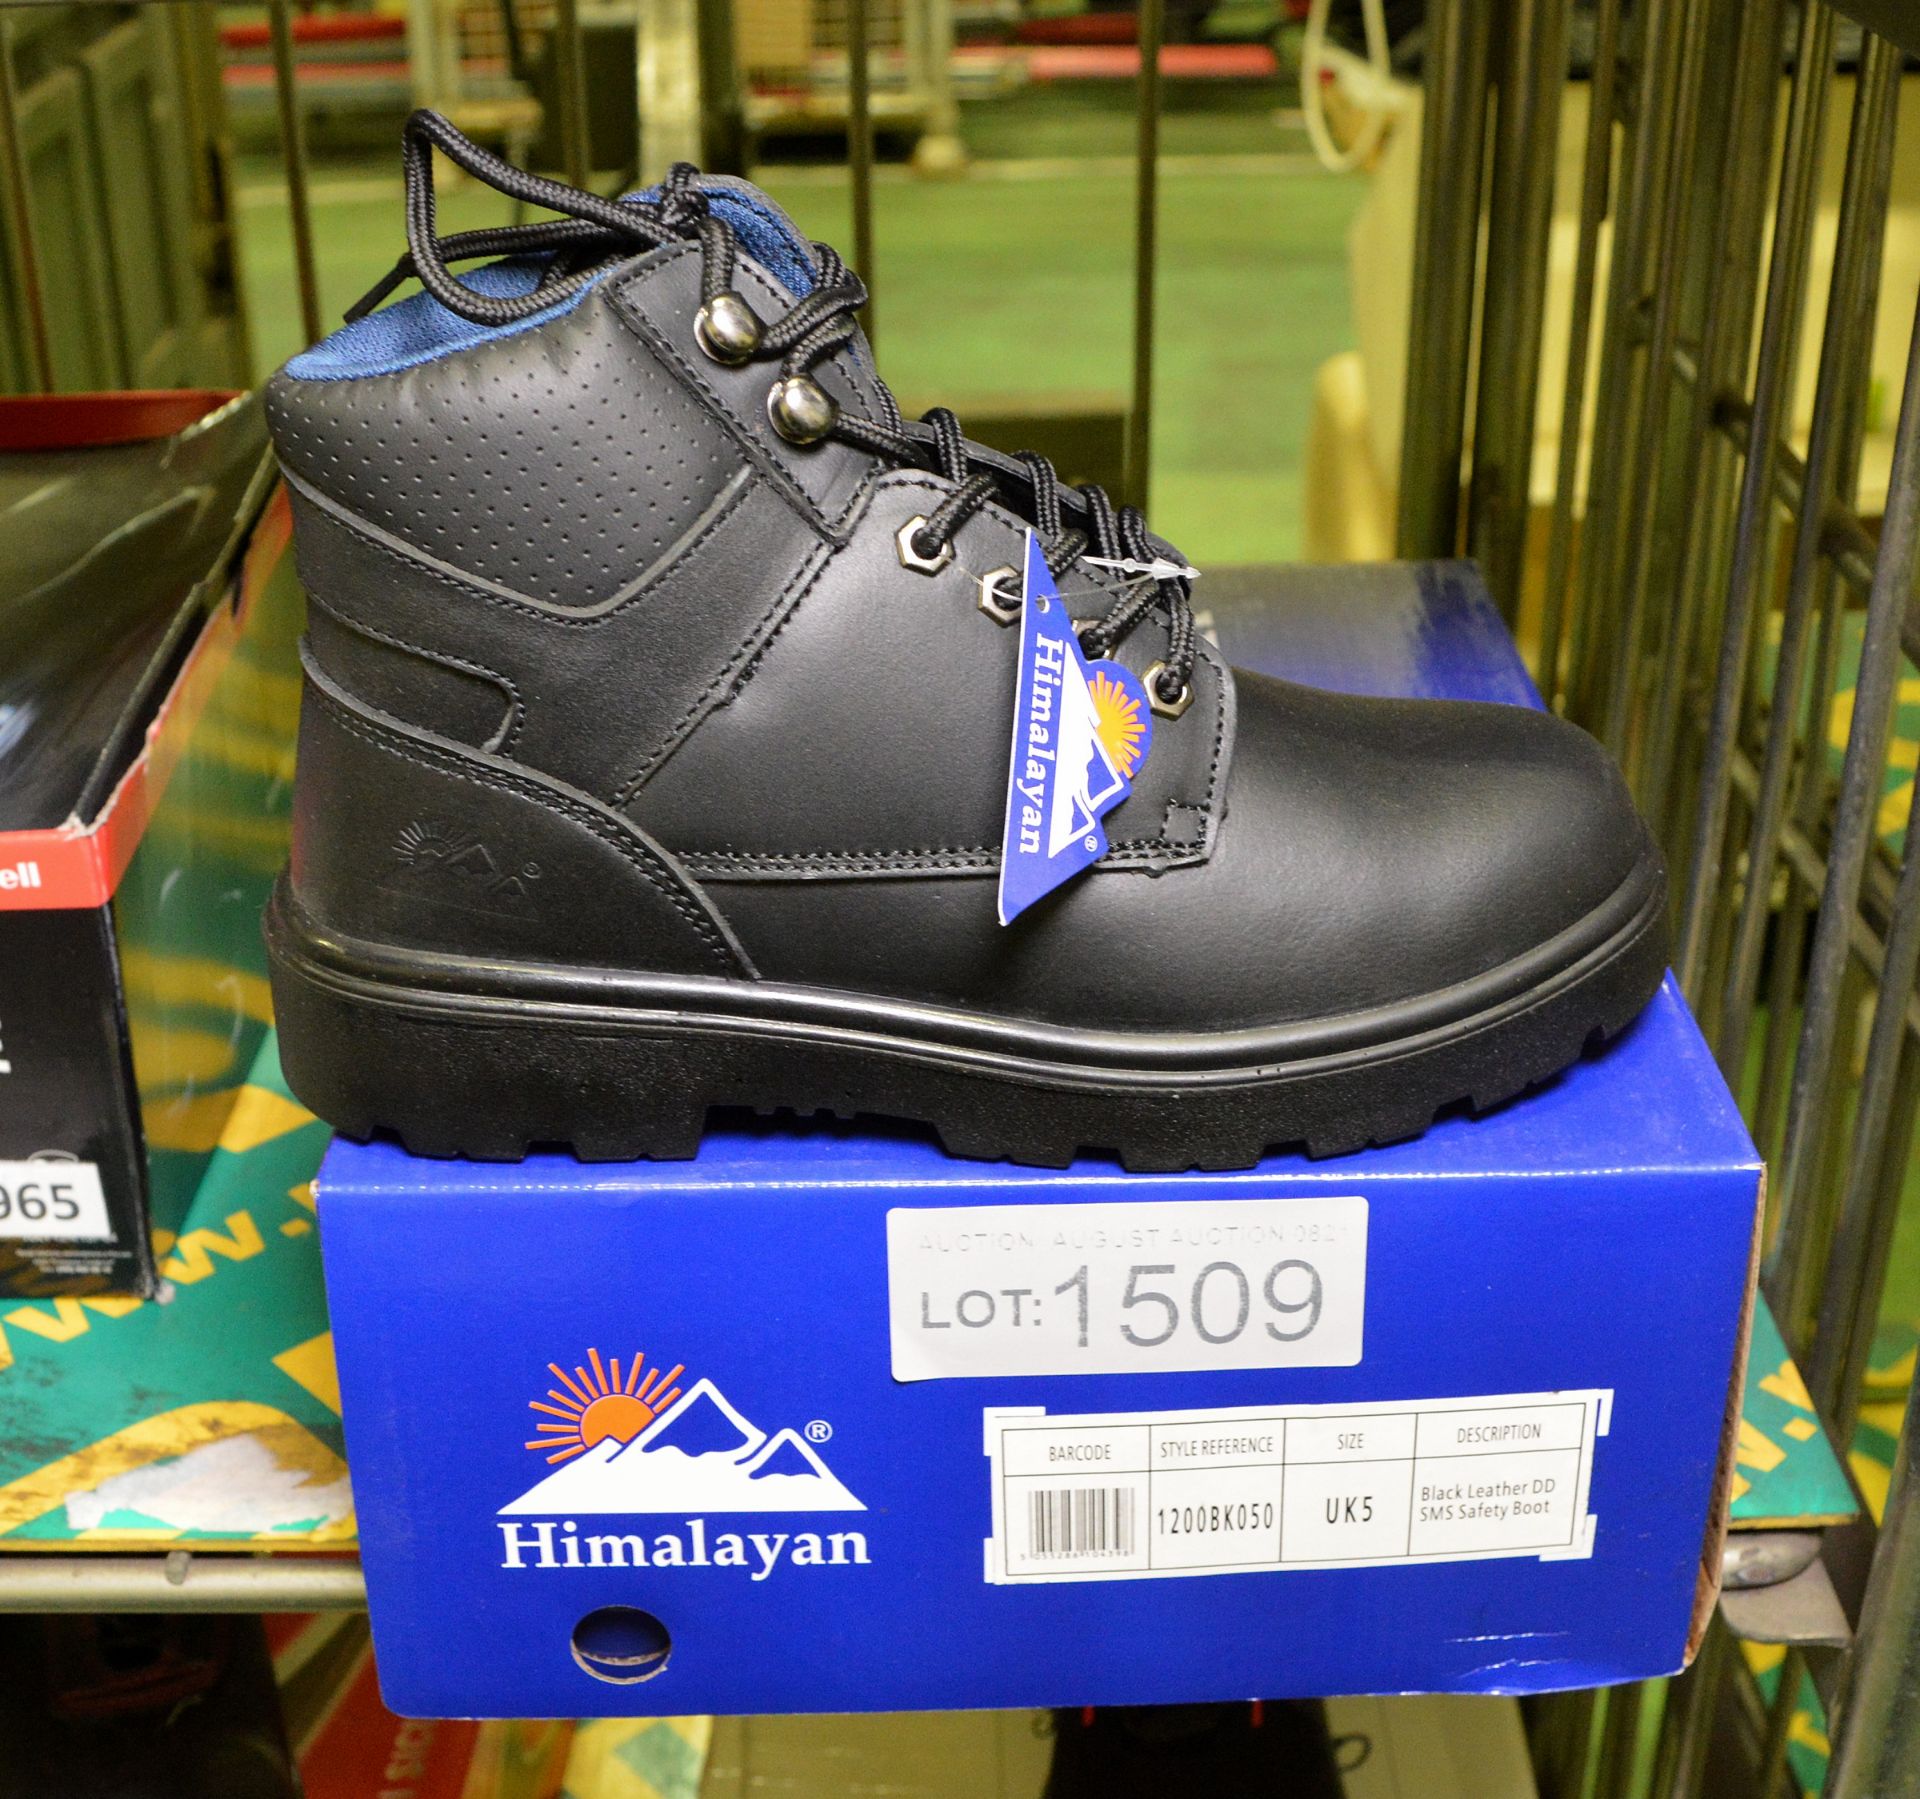 Himalayan safety boots - see pictures for types & size